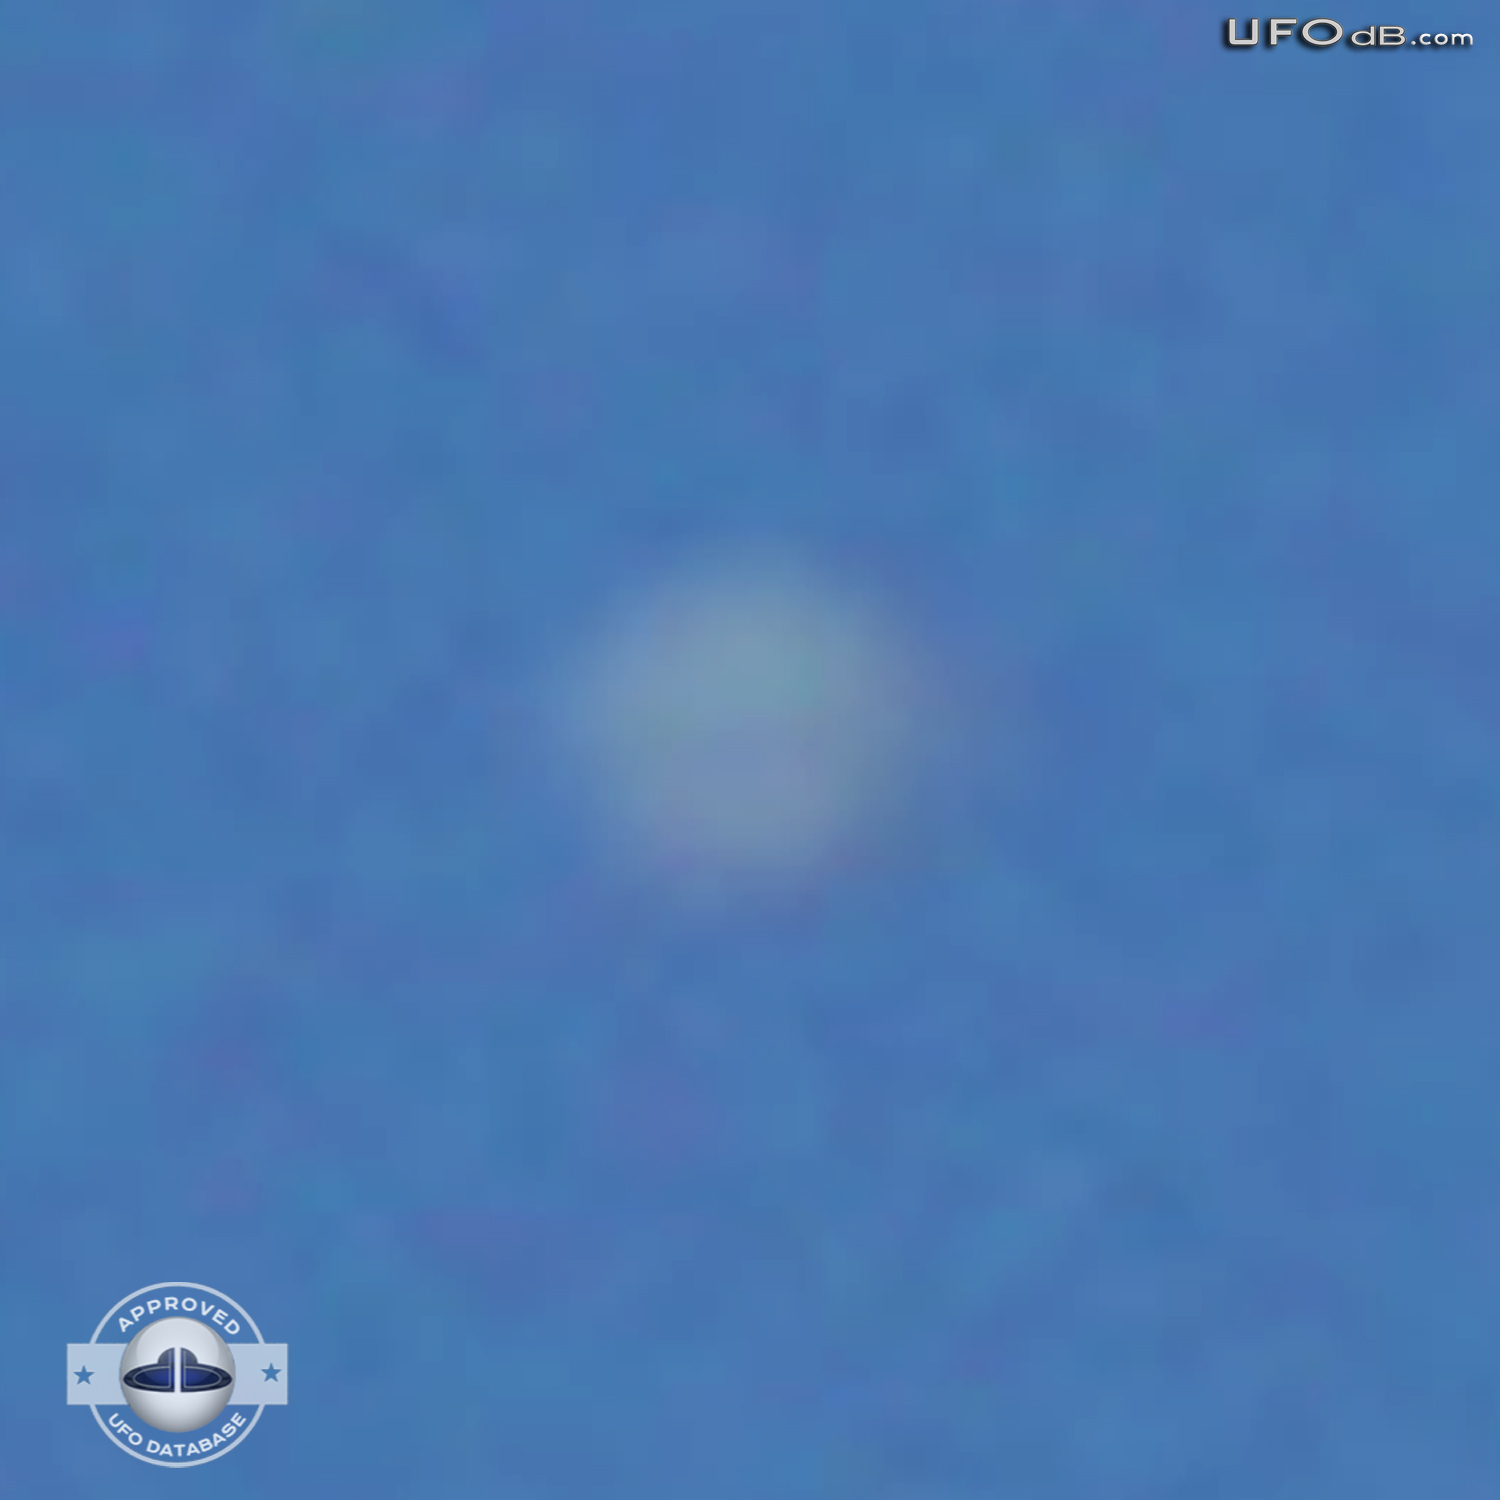 High Altitude UFO near airplane caught on picture Norwich UK May 2011 UFO Picture #309-5